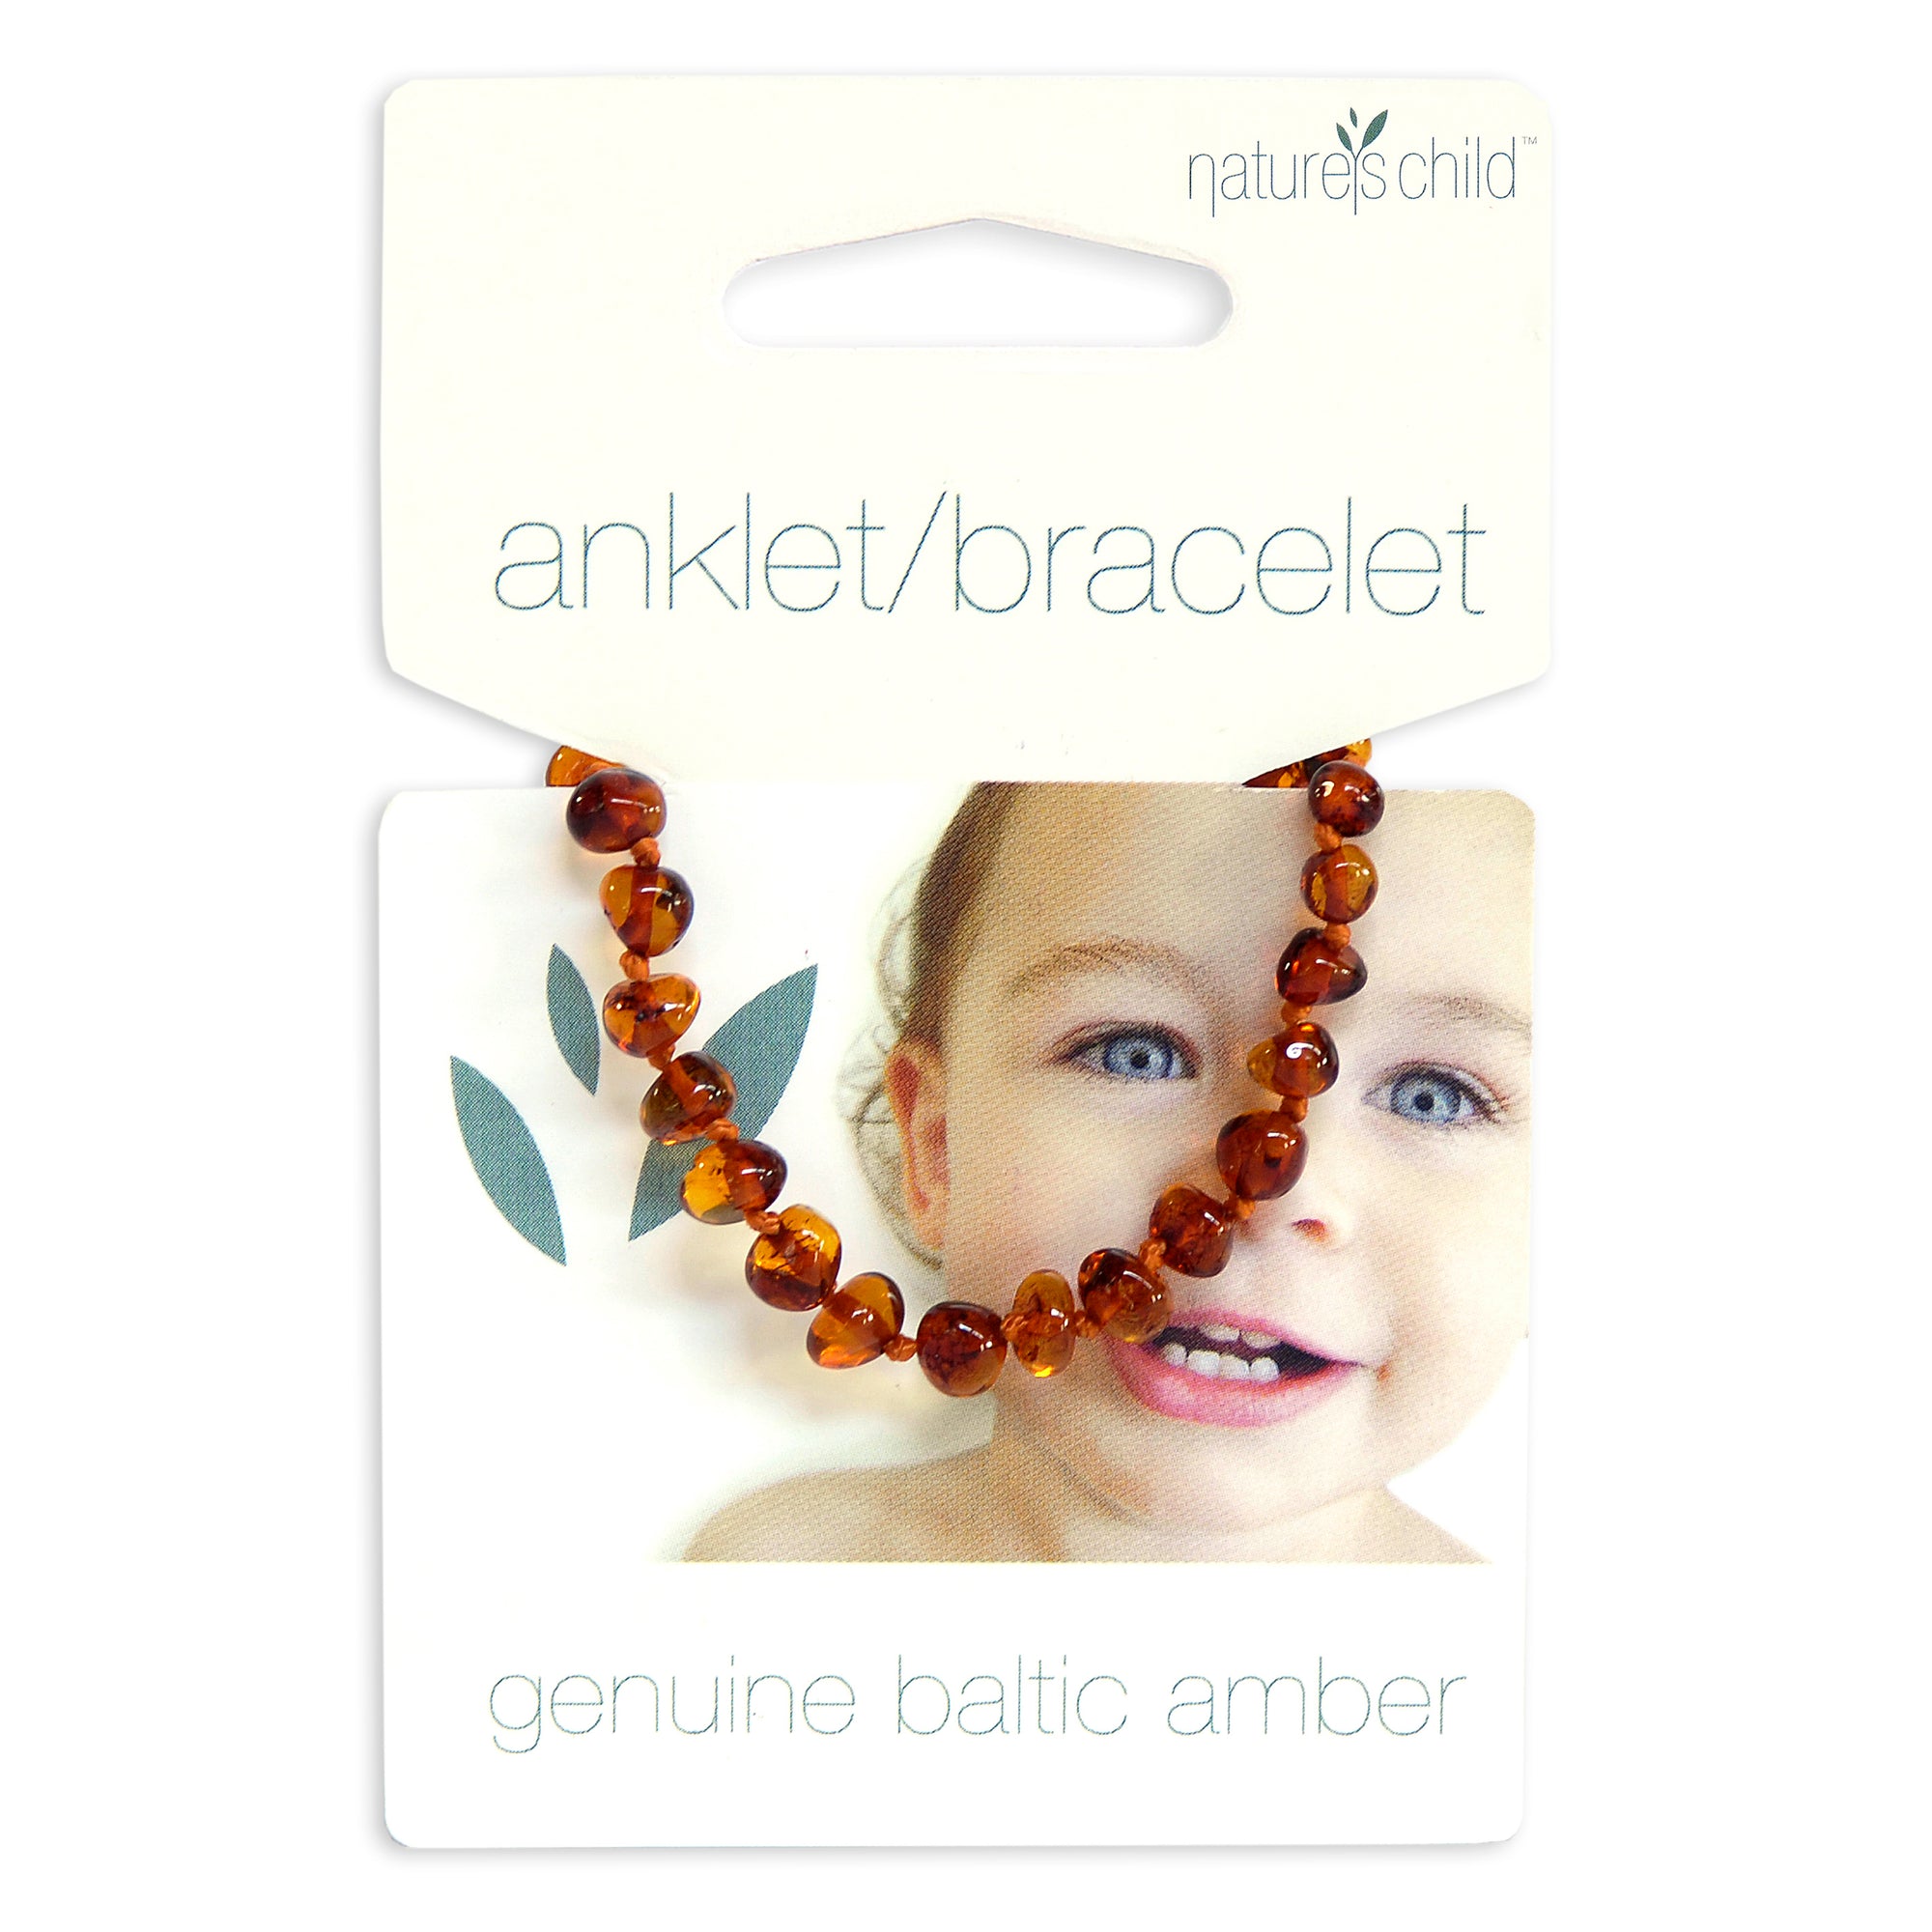 Baby bracelet and anklet by Nature's Child made with genuine baltic amber. Fits a baby from 3 months to 2 years old. Worn by all Australian children. Part of a green parenting style. natural parenting with healing properties. Cognac honey gold colour of rich amber. jewellery for babies, toddlers and children. Natural amber beaded bracelet for infants. 